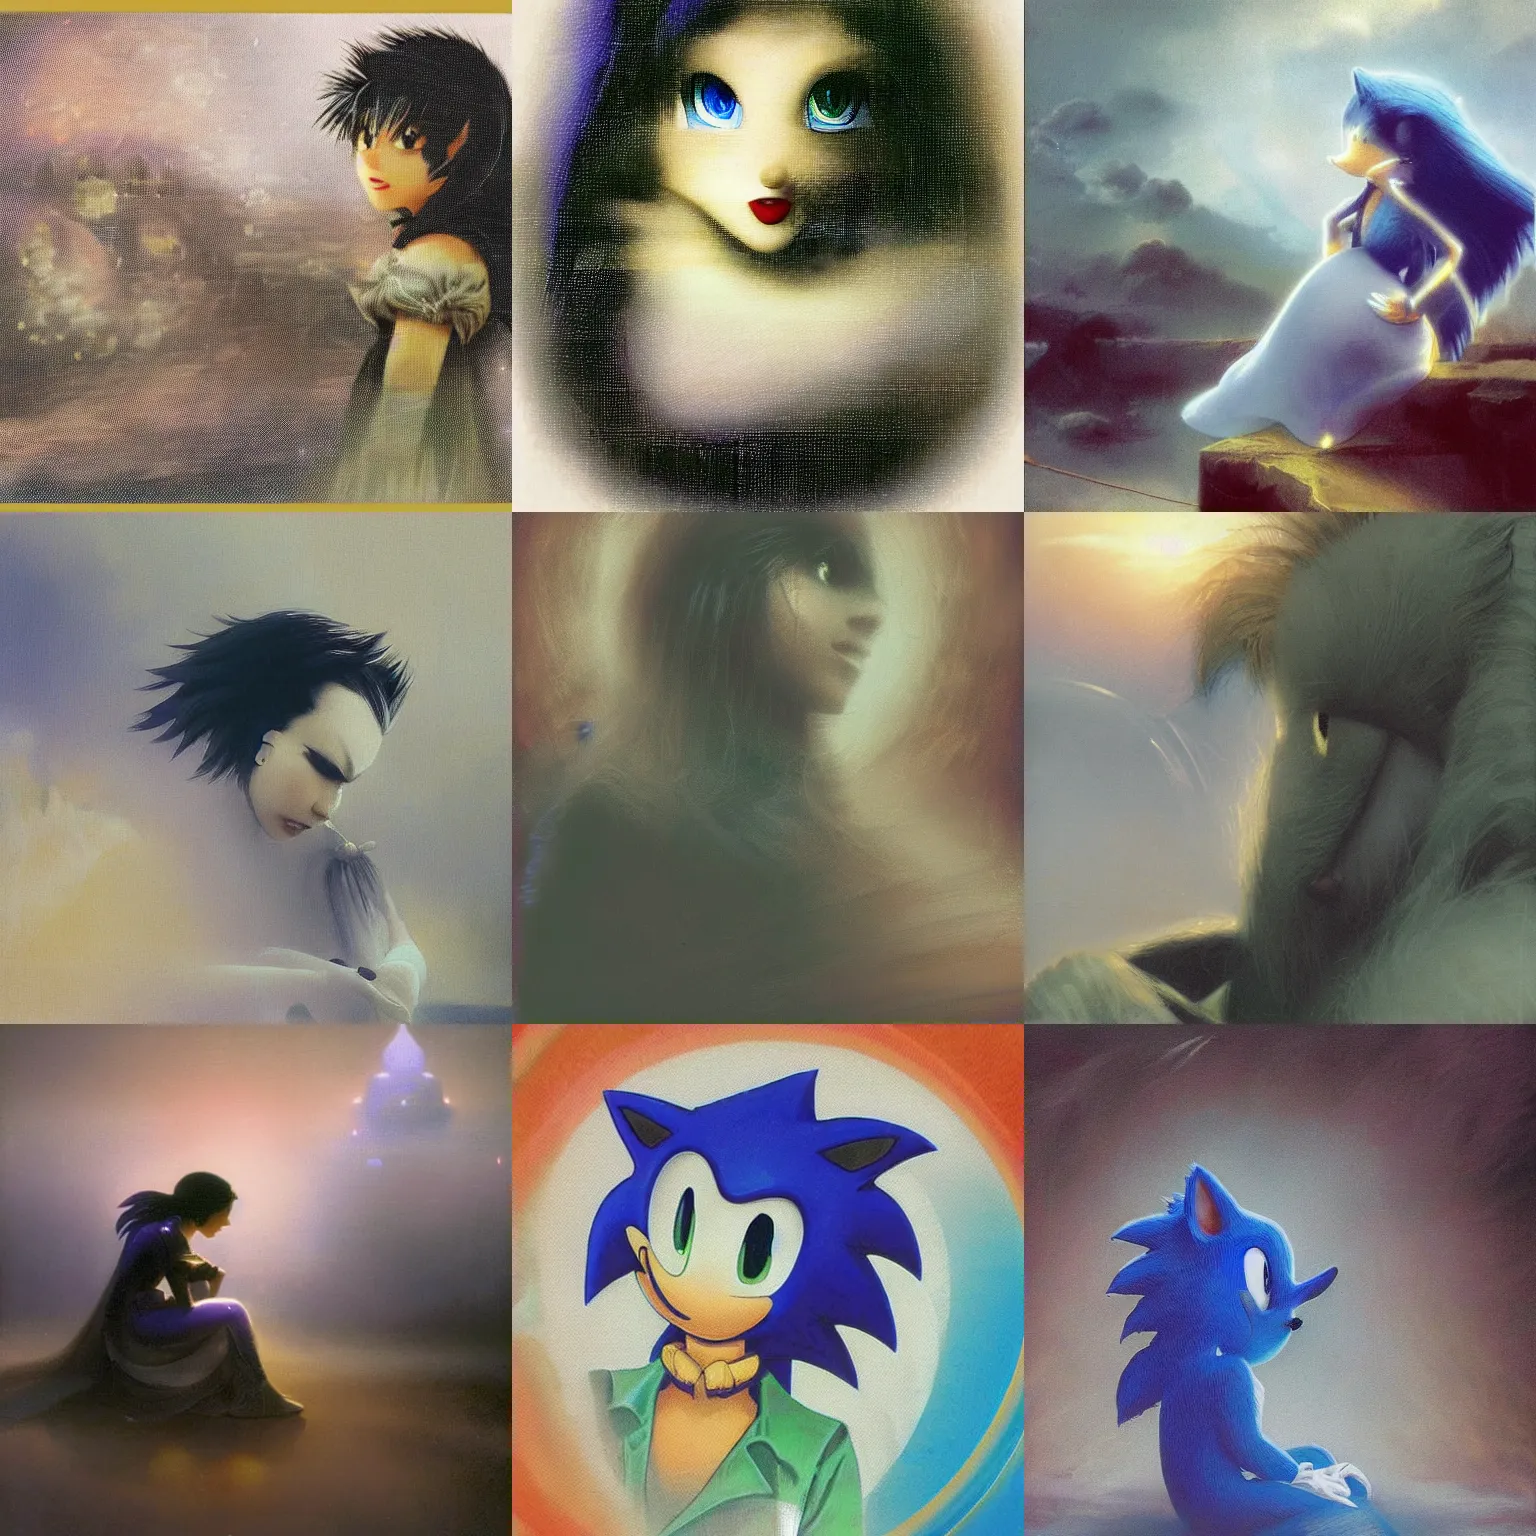 Prompt: sonic the hedgehog computer art beauty & mystery of the woman sitting before us. Enigmatic smile and gaze invite us into his world, and we cannot help but be drawn in. Soft features & delicate way he is dressed make him almost ethereal. Landscape distance and mystery. What secrets sonic the hedgeho gholds. stencil by Tony Moore, by Ivan Aivazovsky passionate